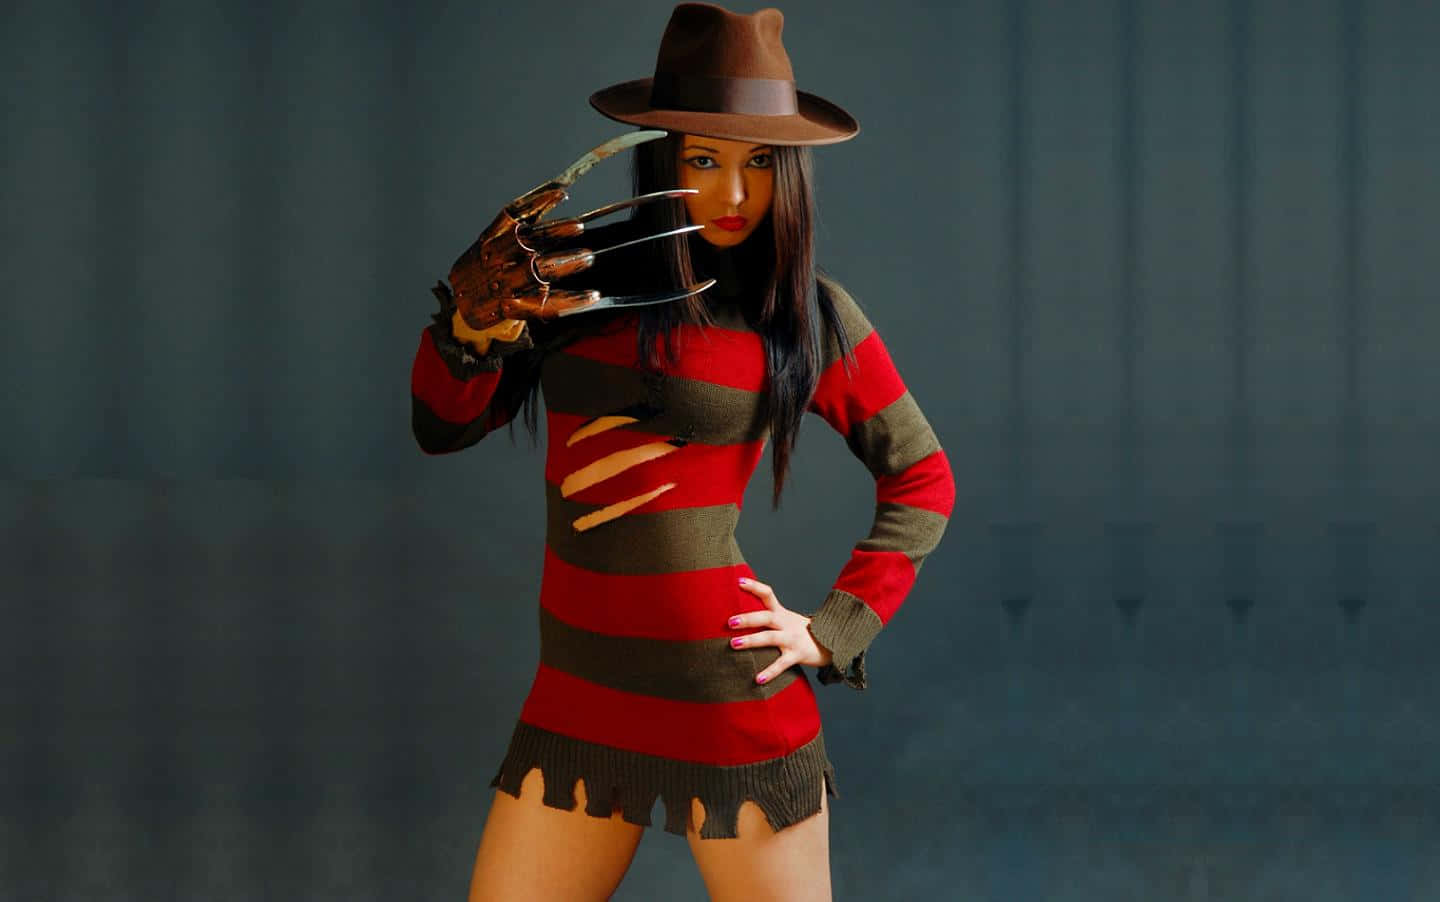 Freddy Krueger menacingly poses in a dark, eerie setting with his iconic glove and hat